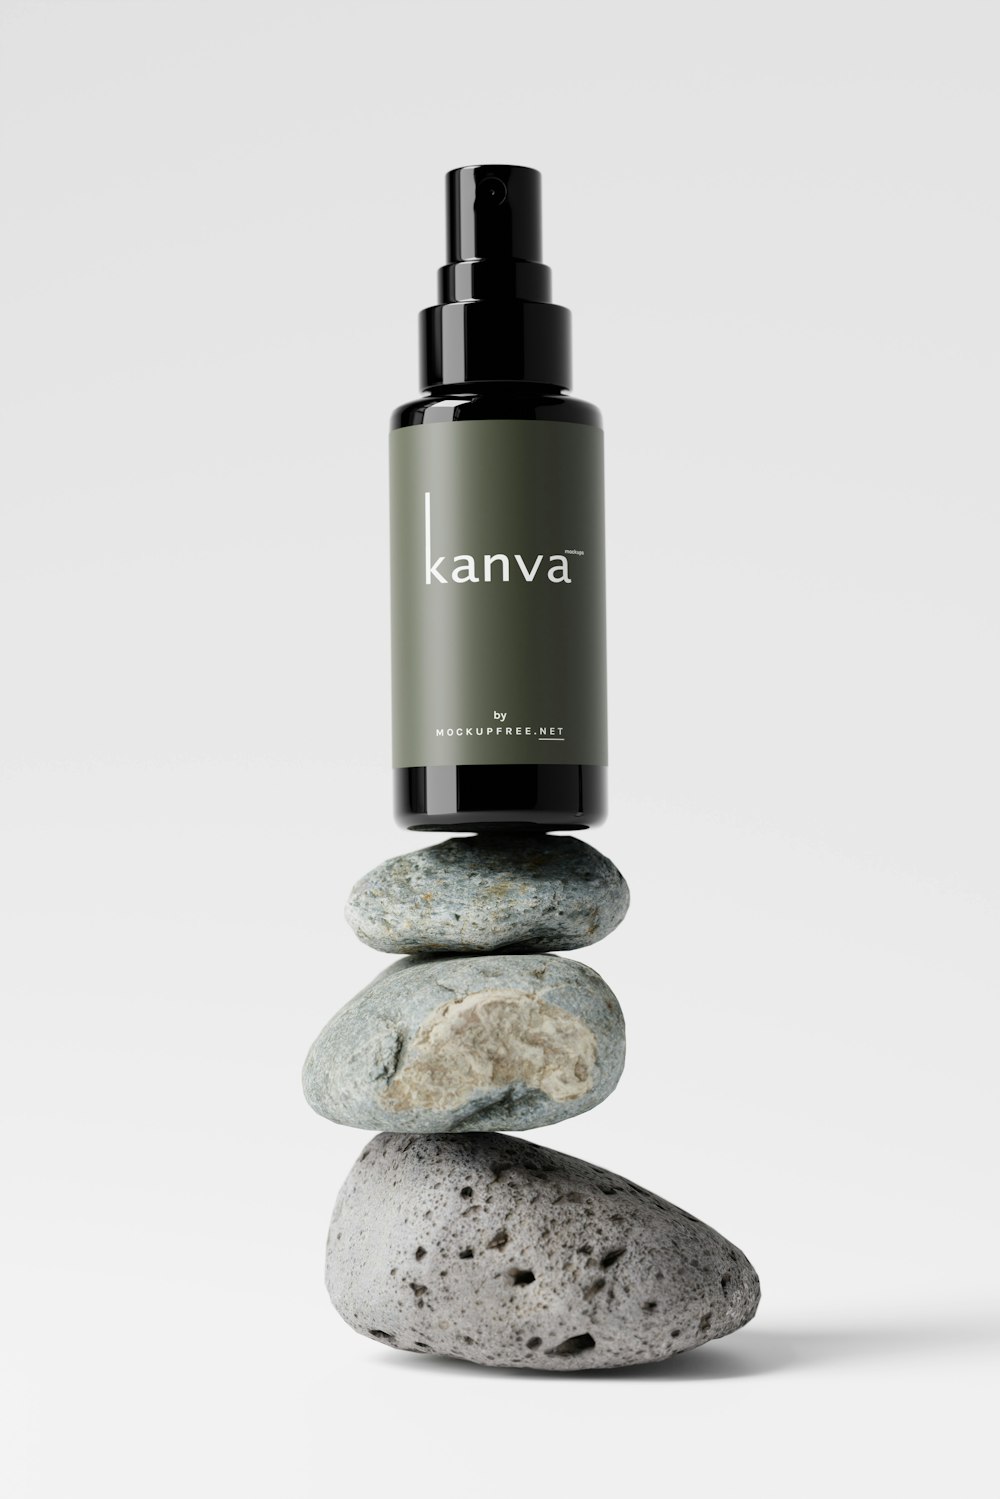 a bottle of kanva on top of a pile of rocks